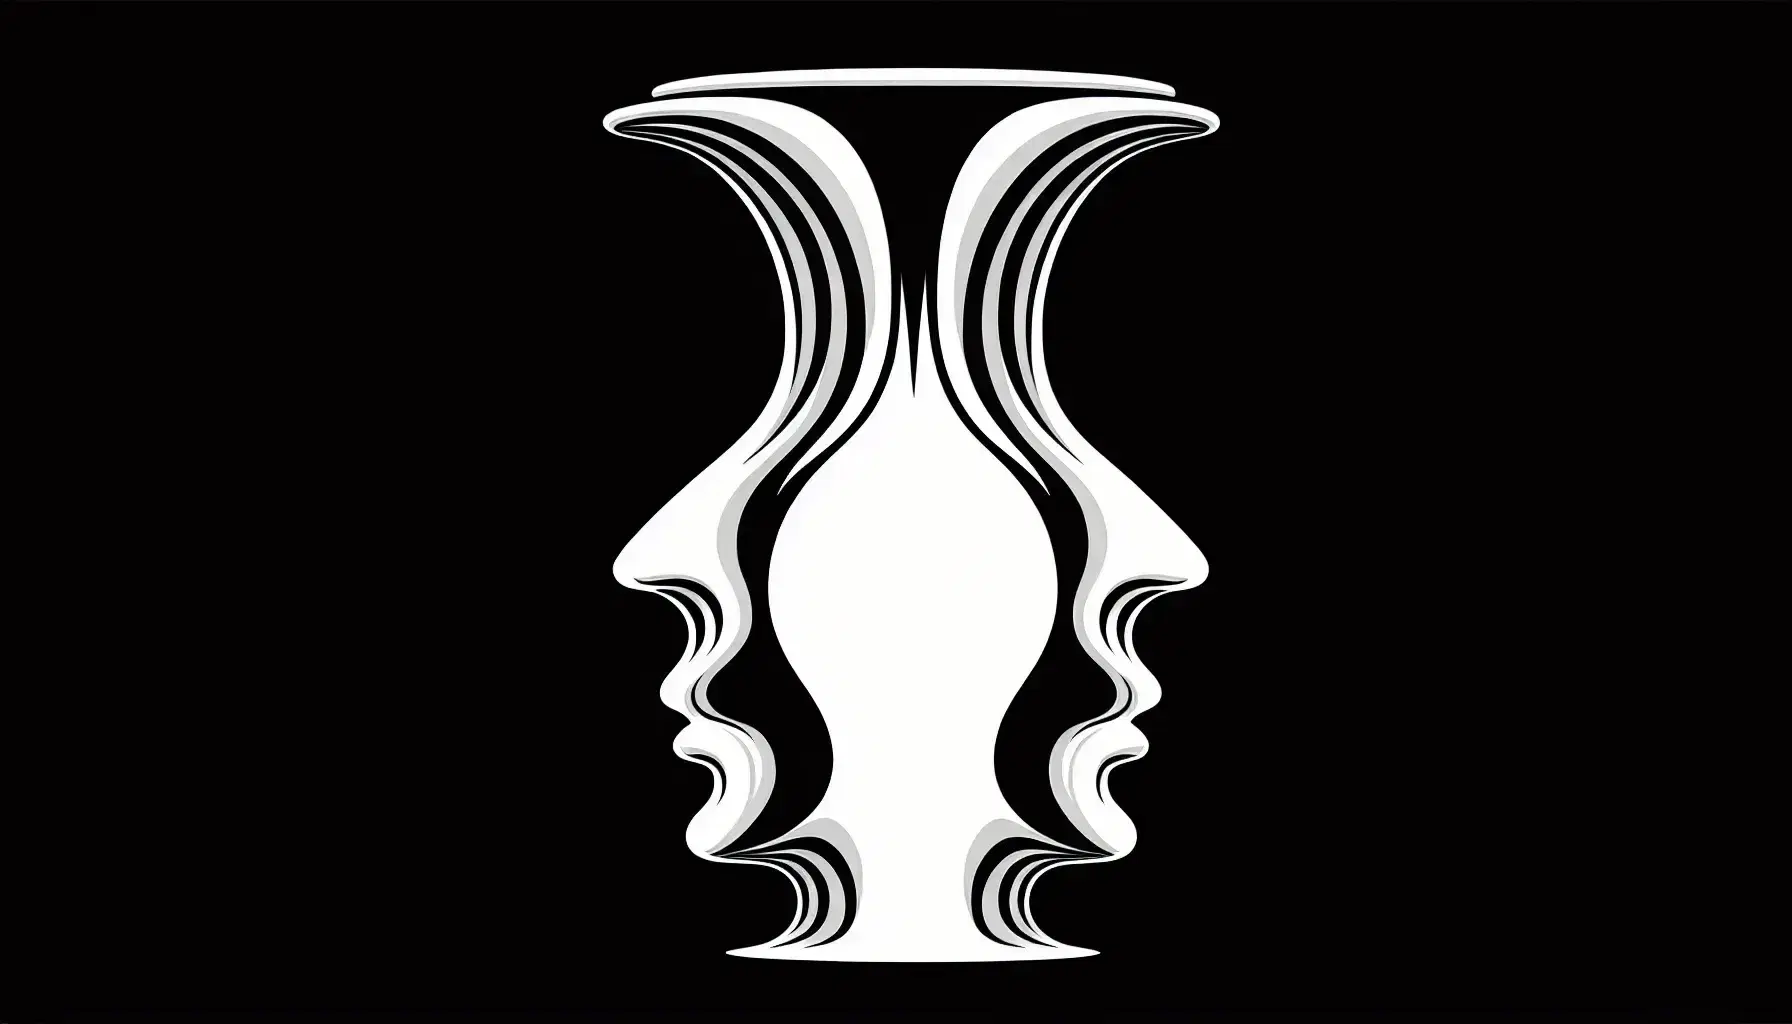 Optical illusion of the Rubin Vase showing a symmetrical white vase or two faces in profile on a black background.